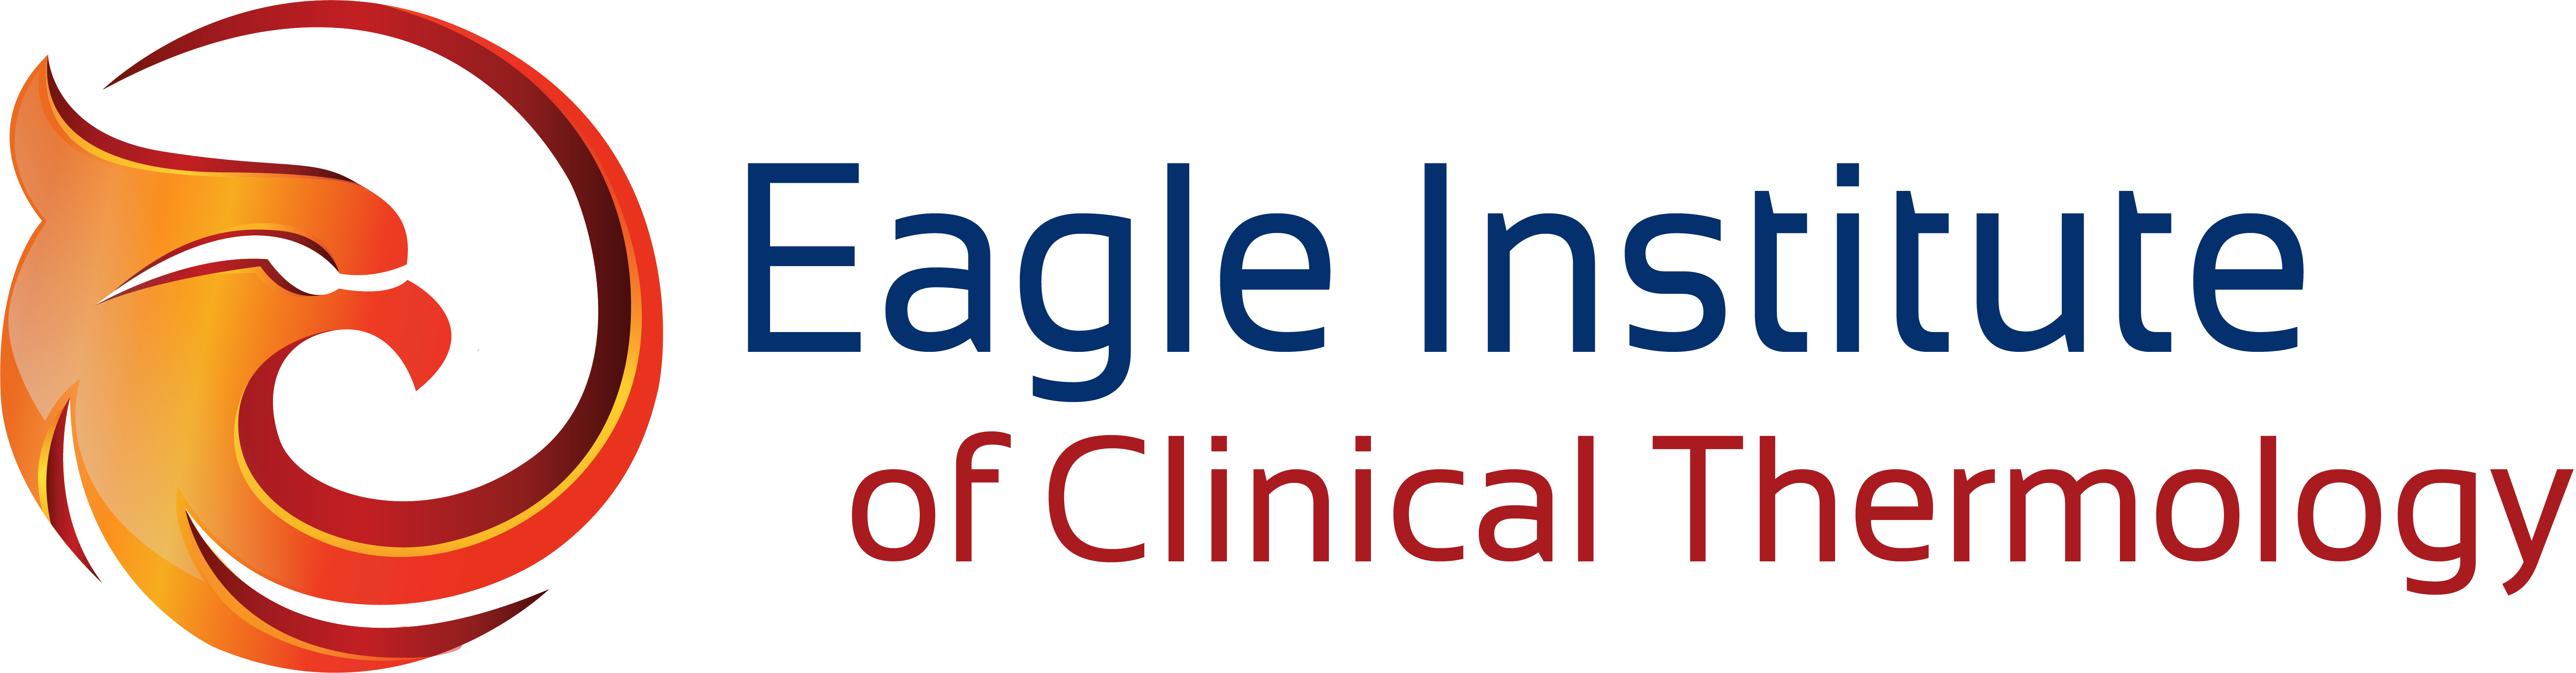 Eagle Institute of Clinical Thermography